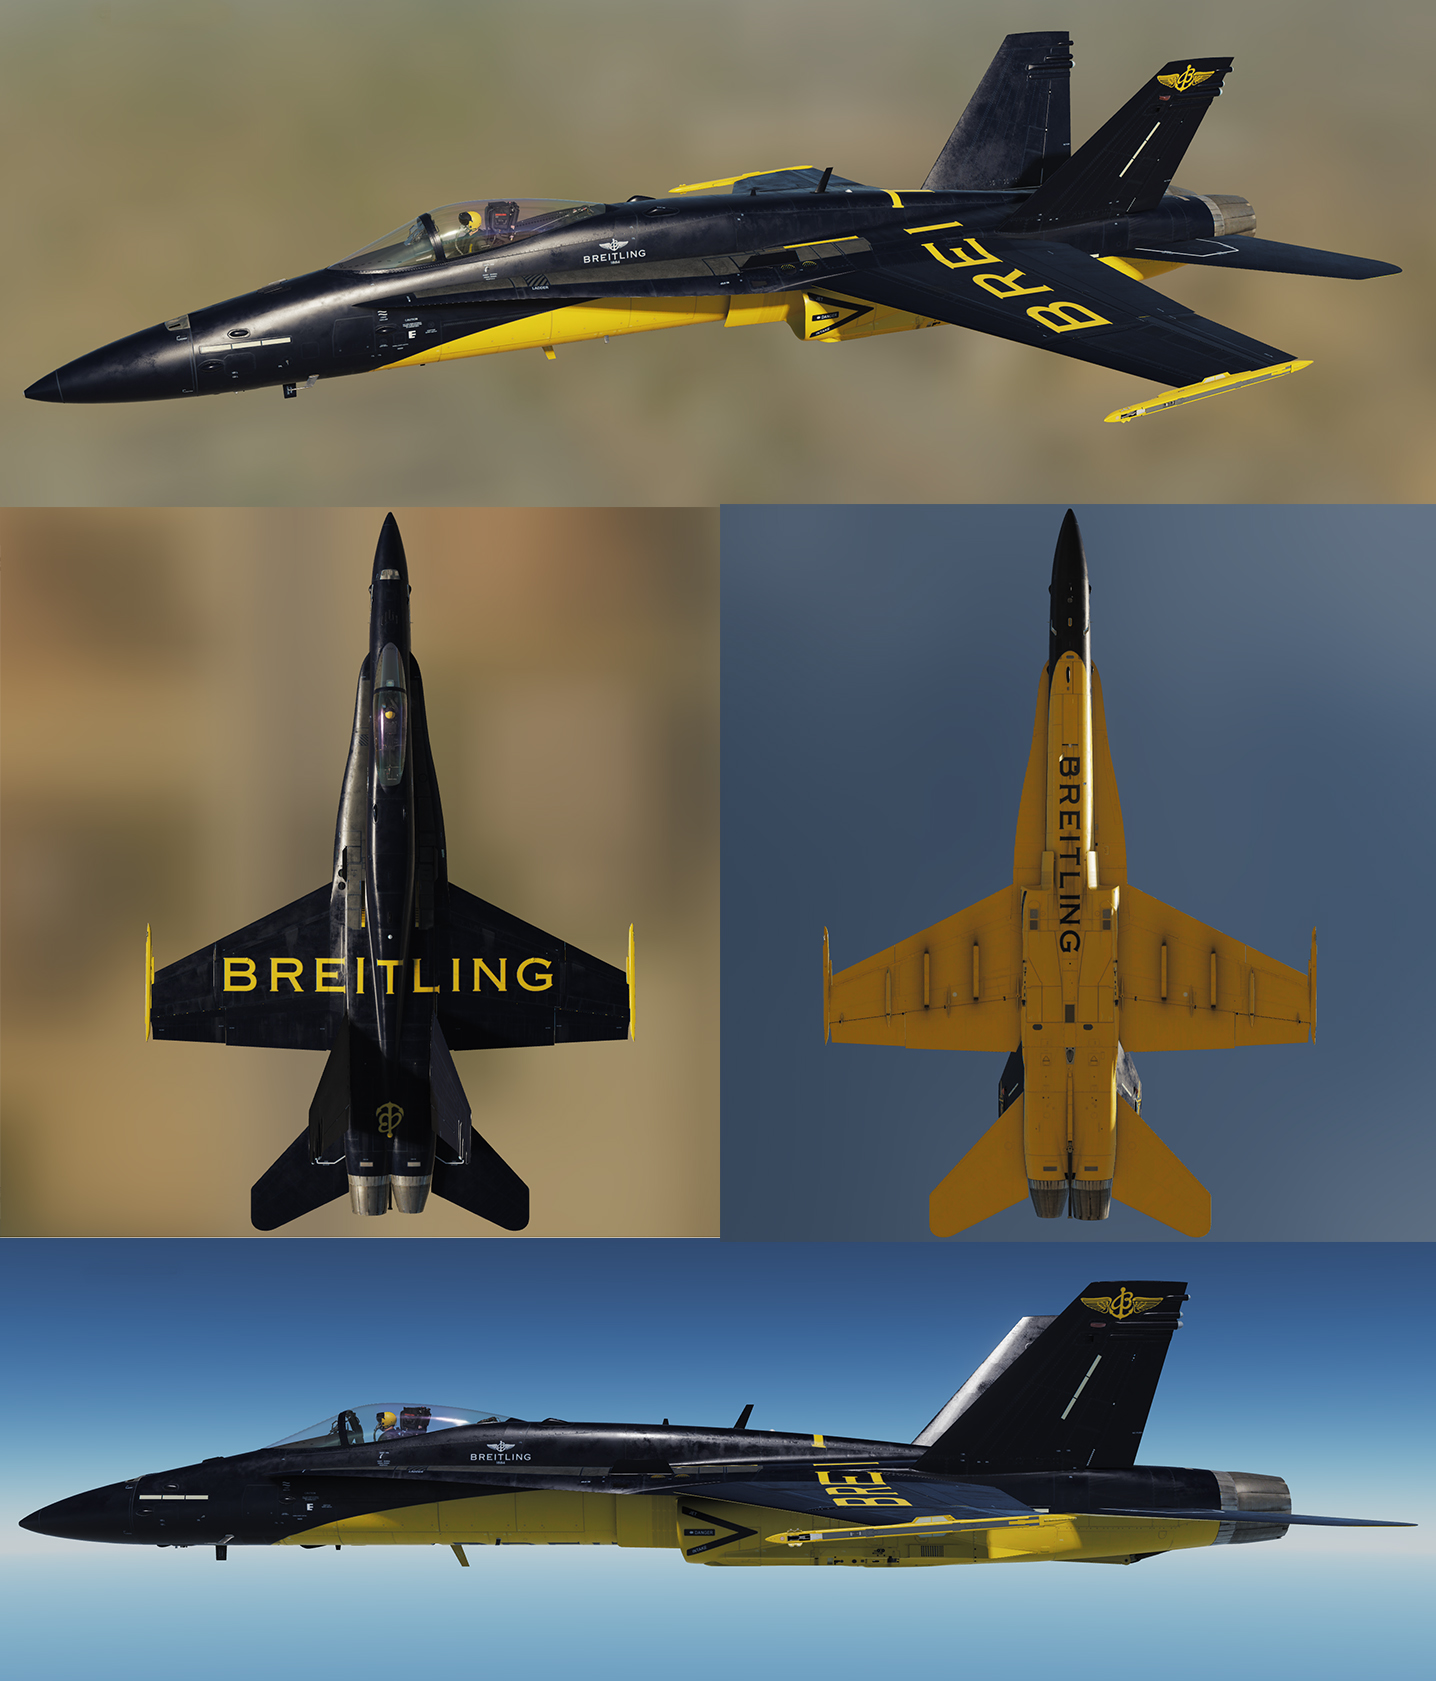  F-18 Racing Livery: Breitling